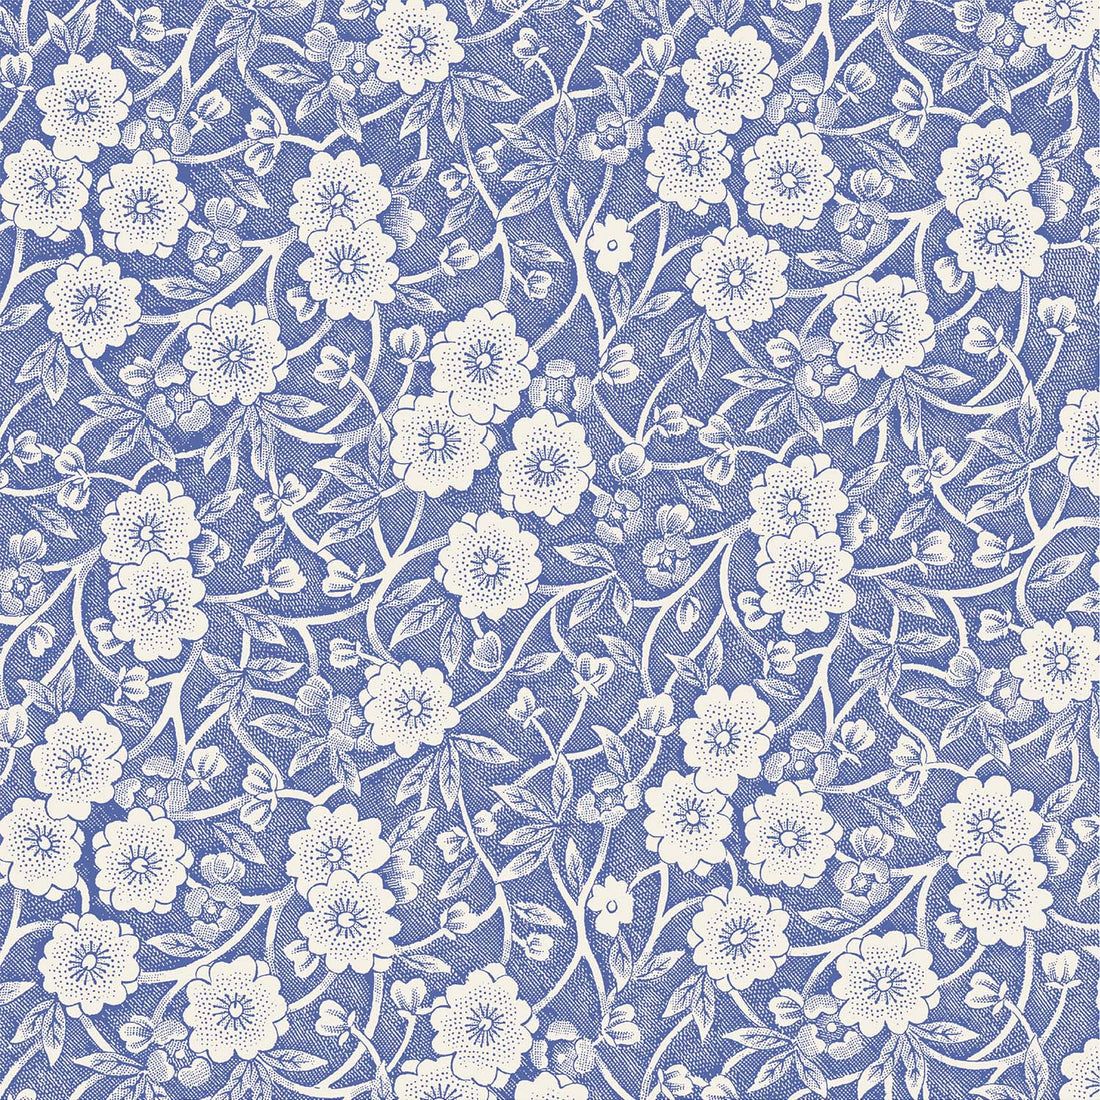 Beautiful Blue Calico Napkins with exquisitely decorated white flowers.